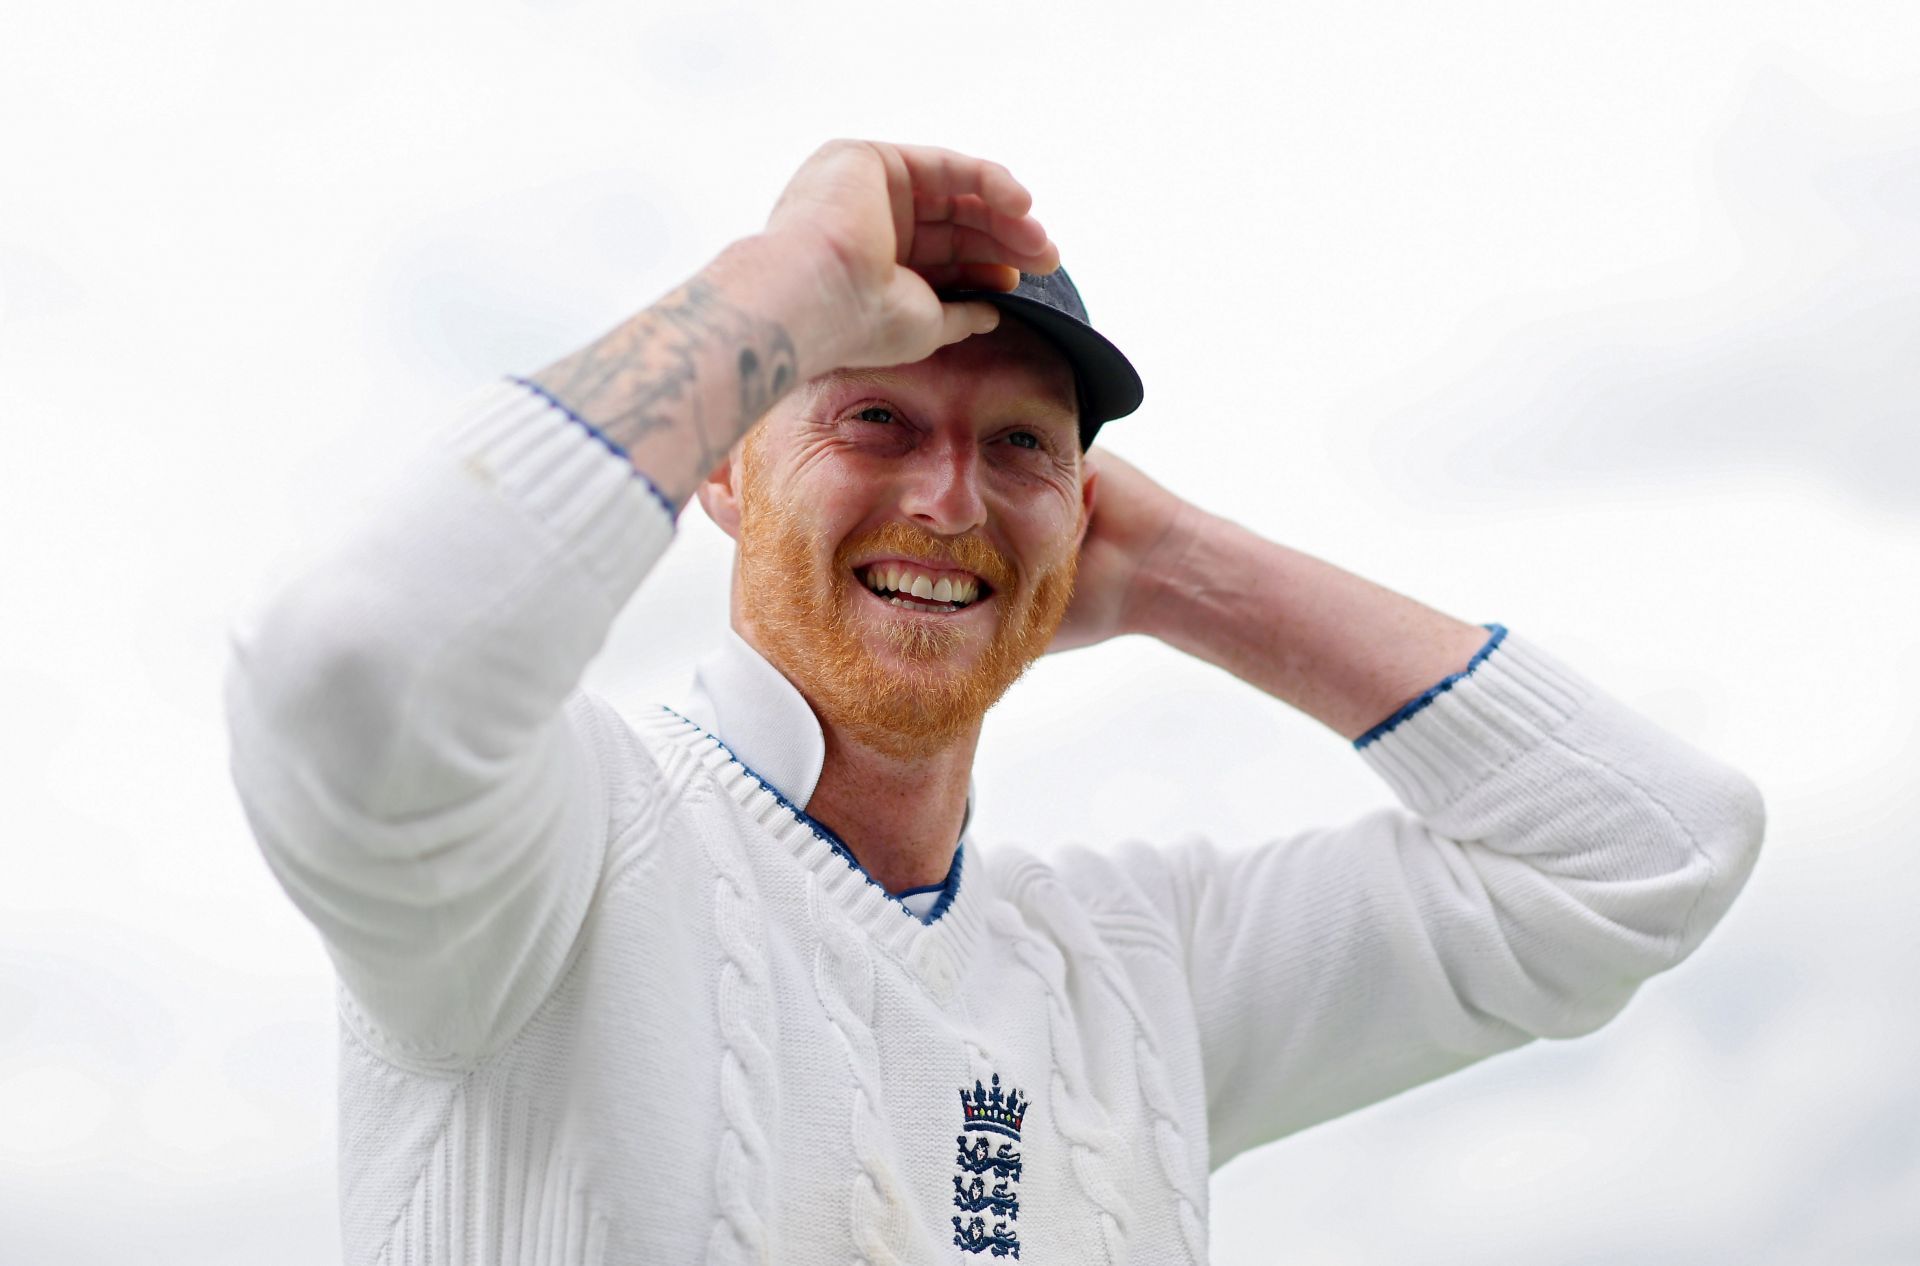 England registered a mammoth seven-wicket win over India to level the series